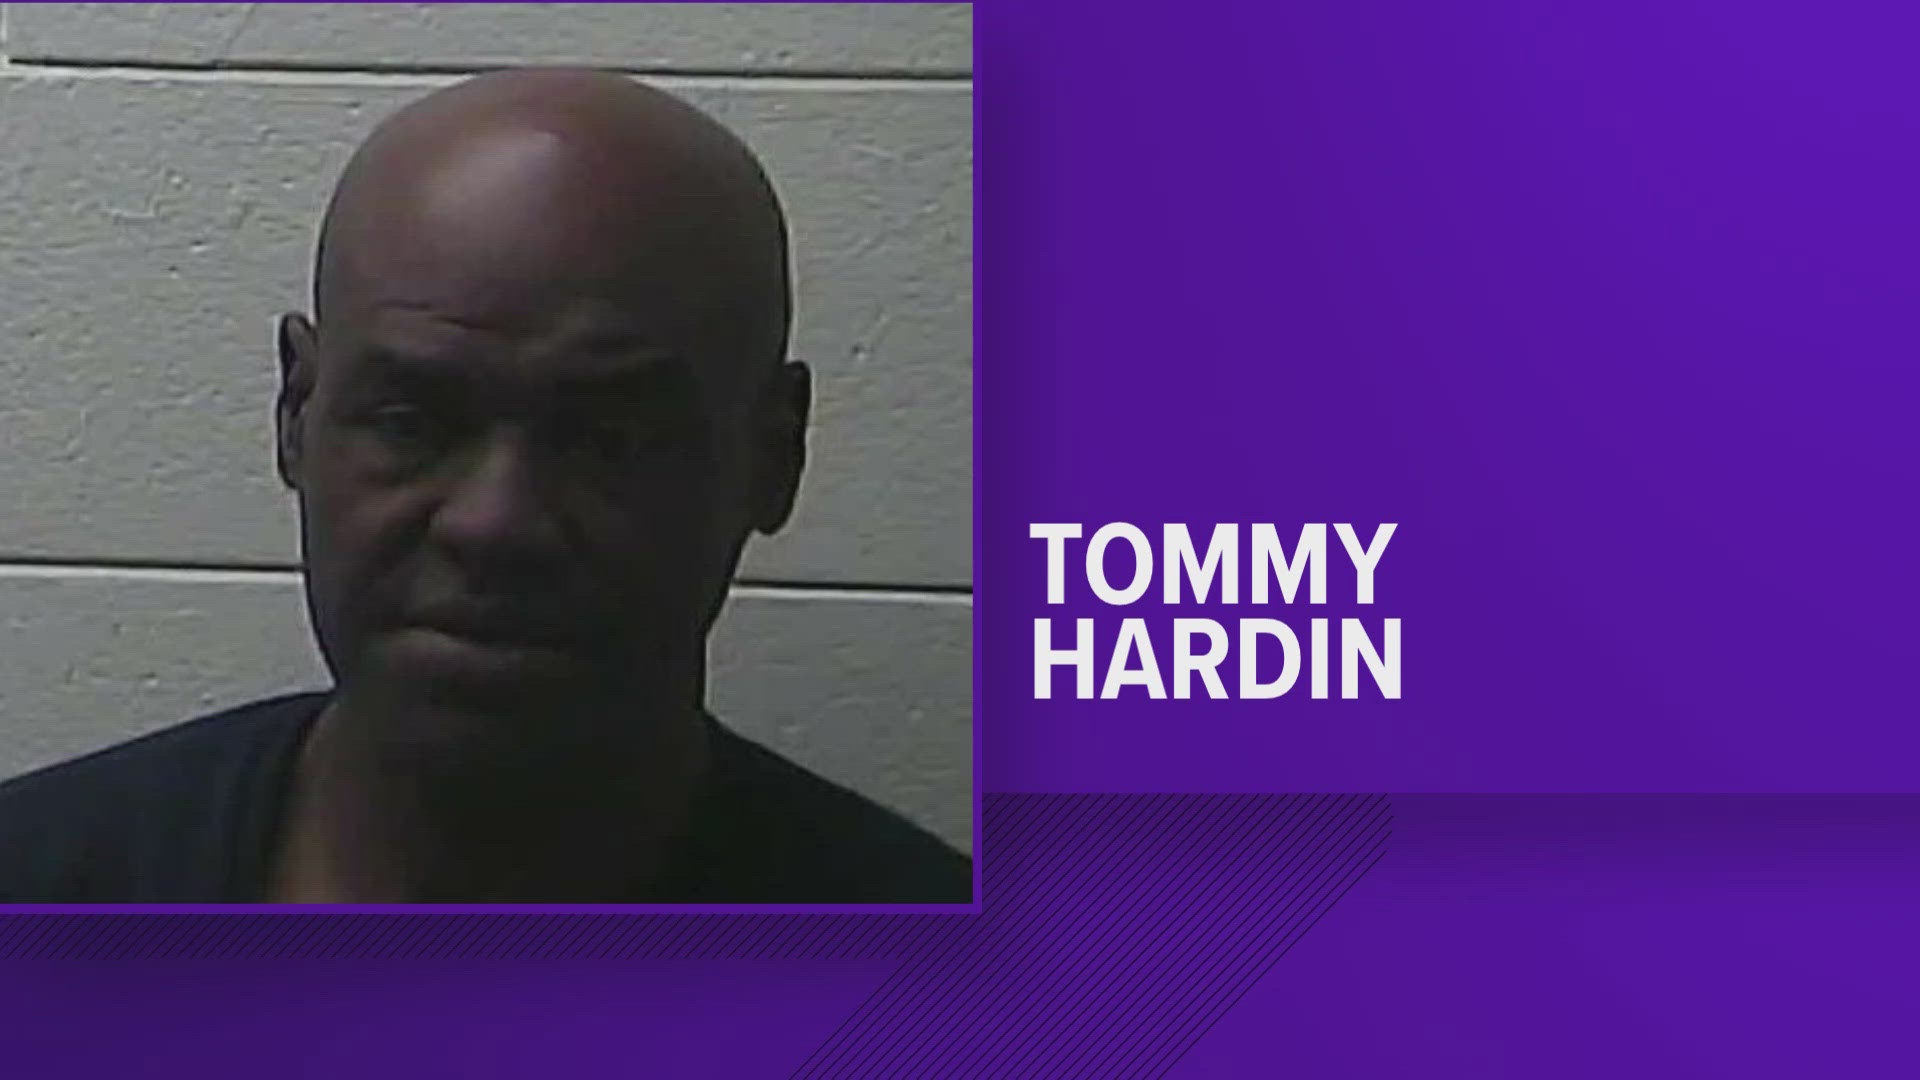 Tommy Hardin was previously convicted in 33 robberies in 2005 and served 20 years of a 40 year sentence. He was paroled in 2022.